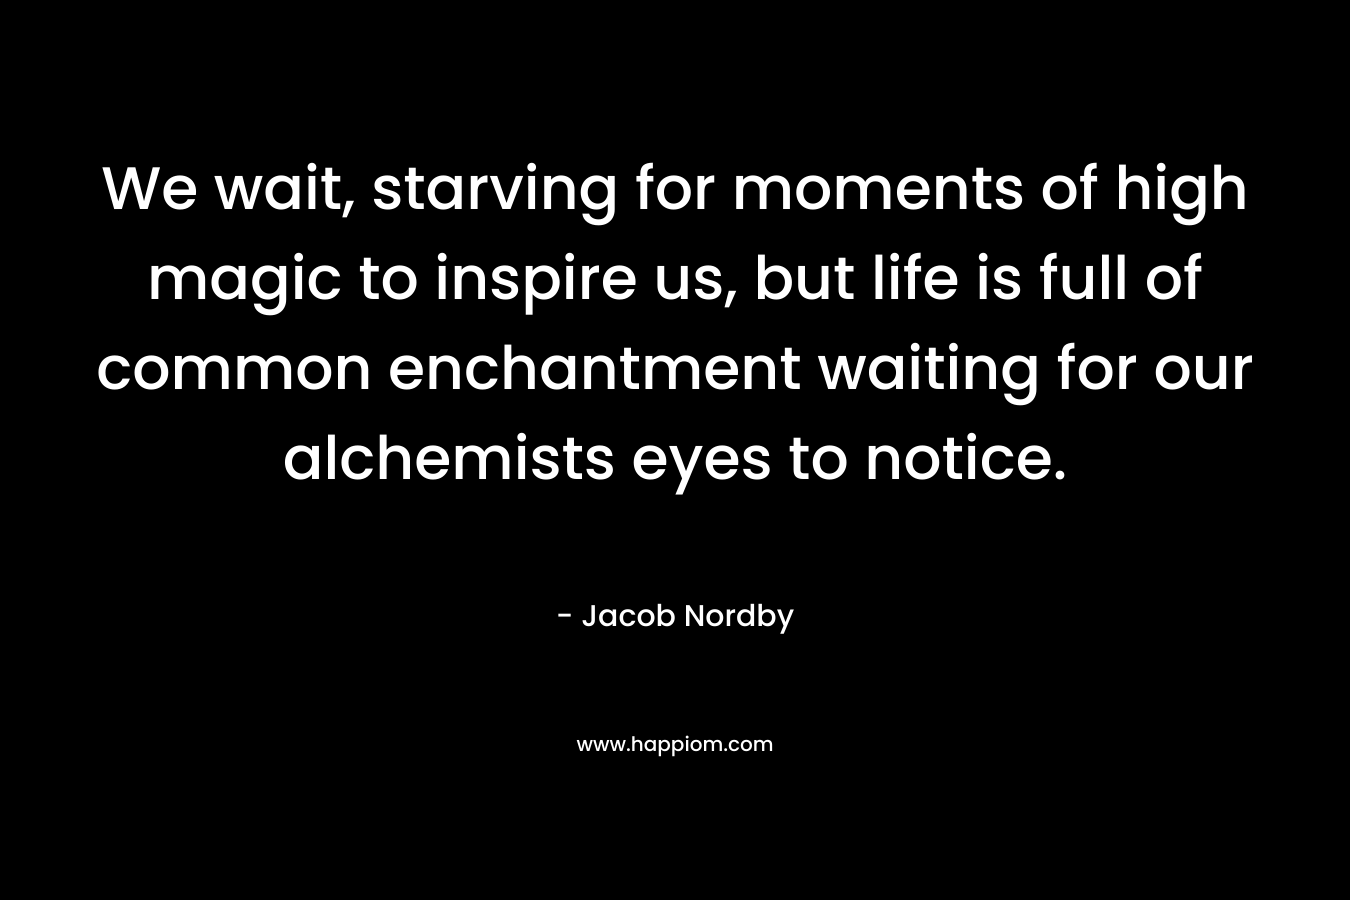 We wait, starving for moments of high magic to inspire us, but life is full of common enchantment waiting for our alchemists eyes to notice. – Jacob Nordby